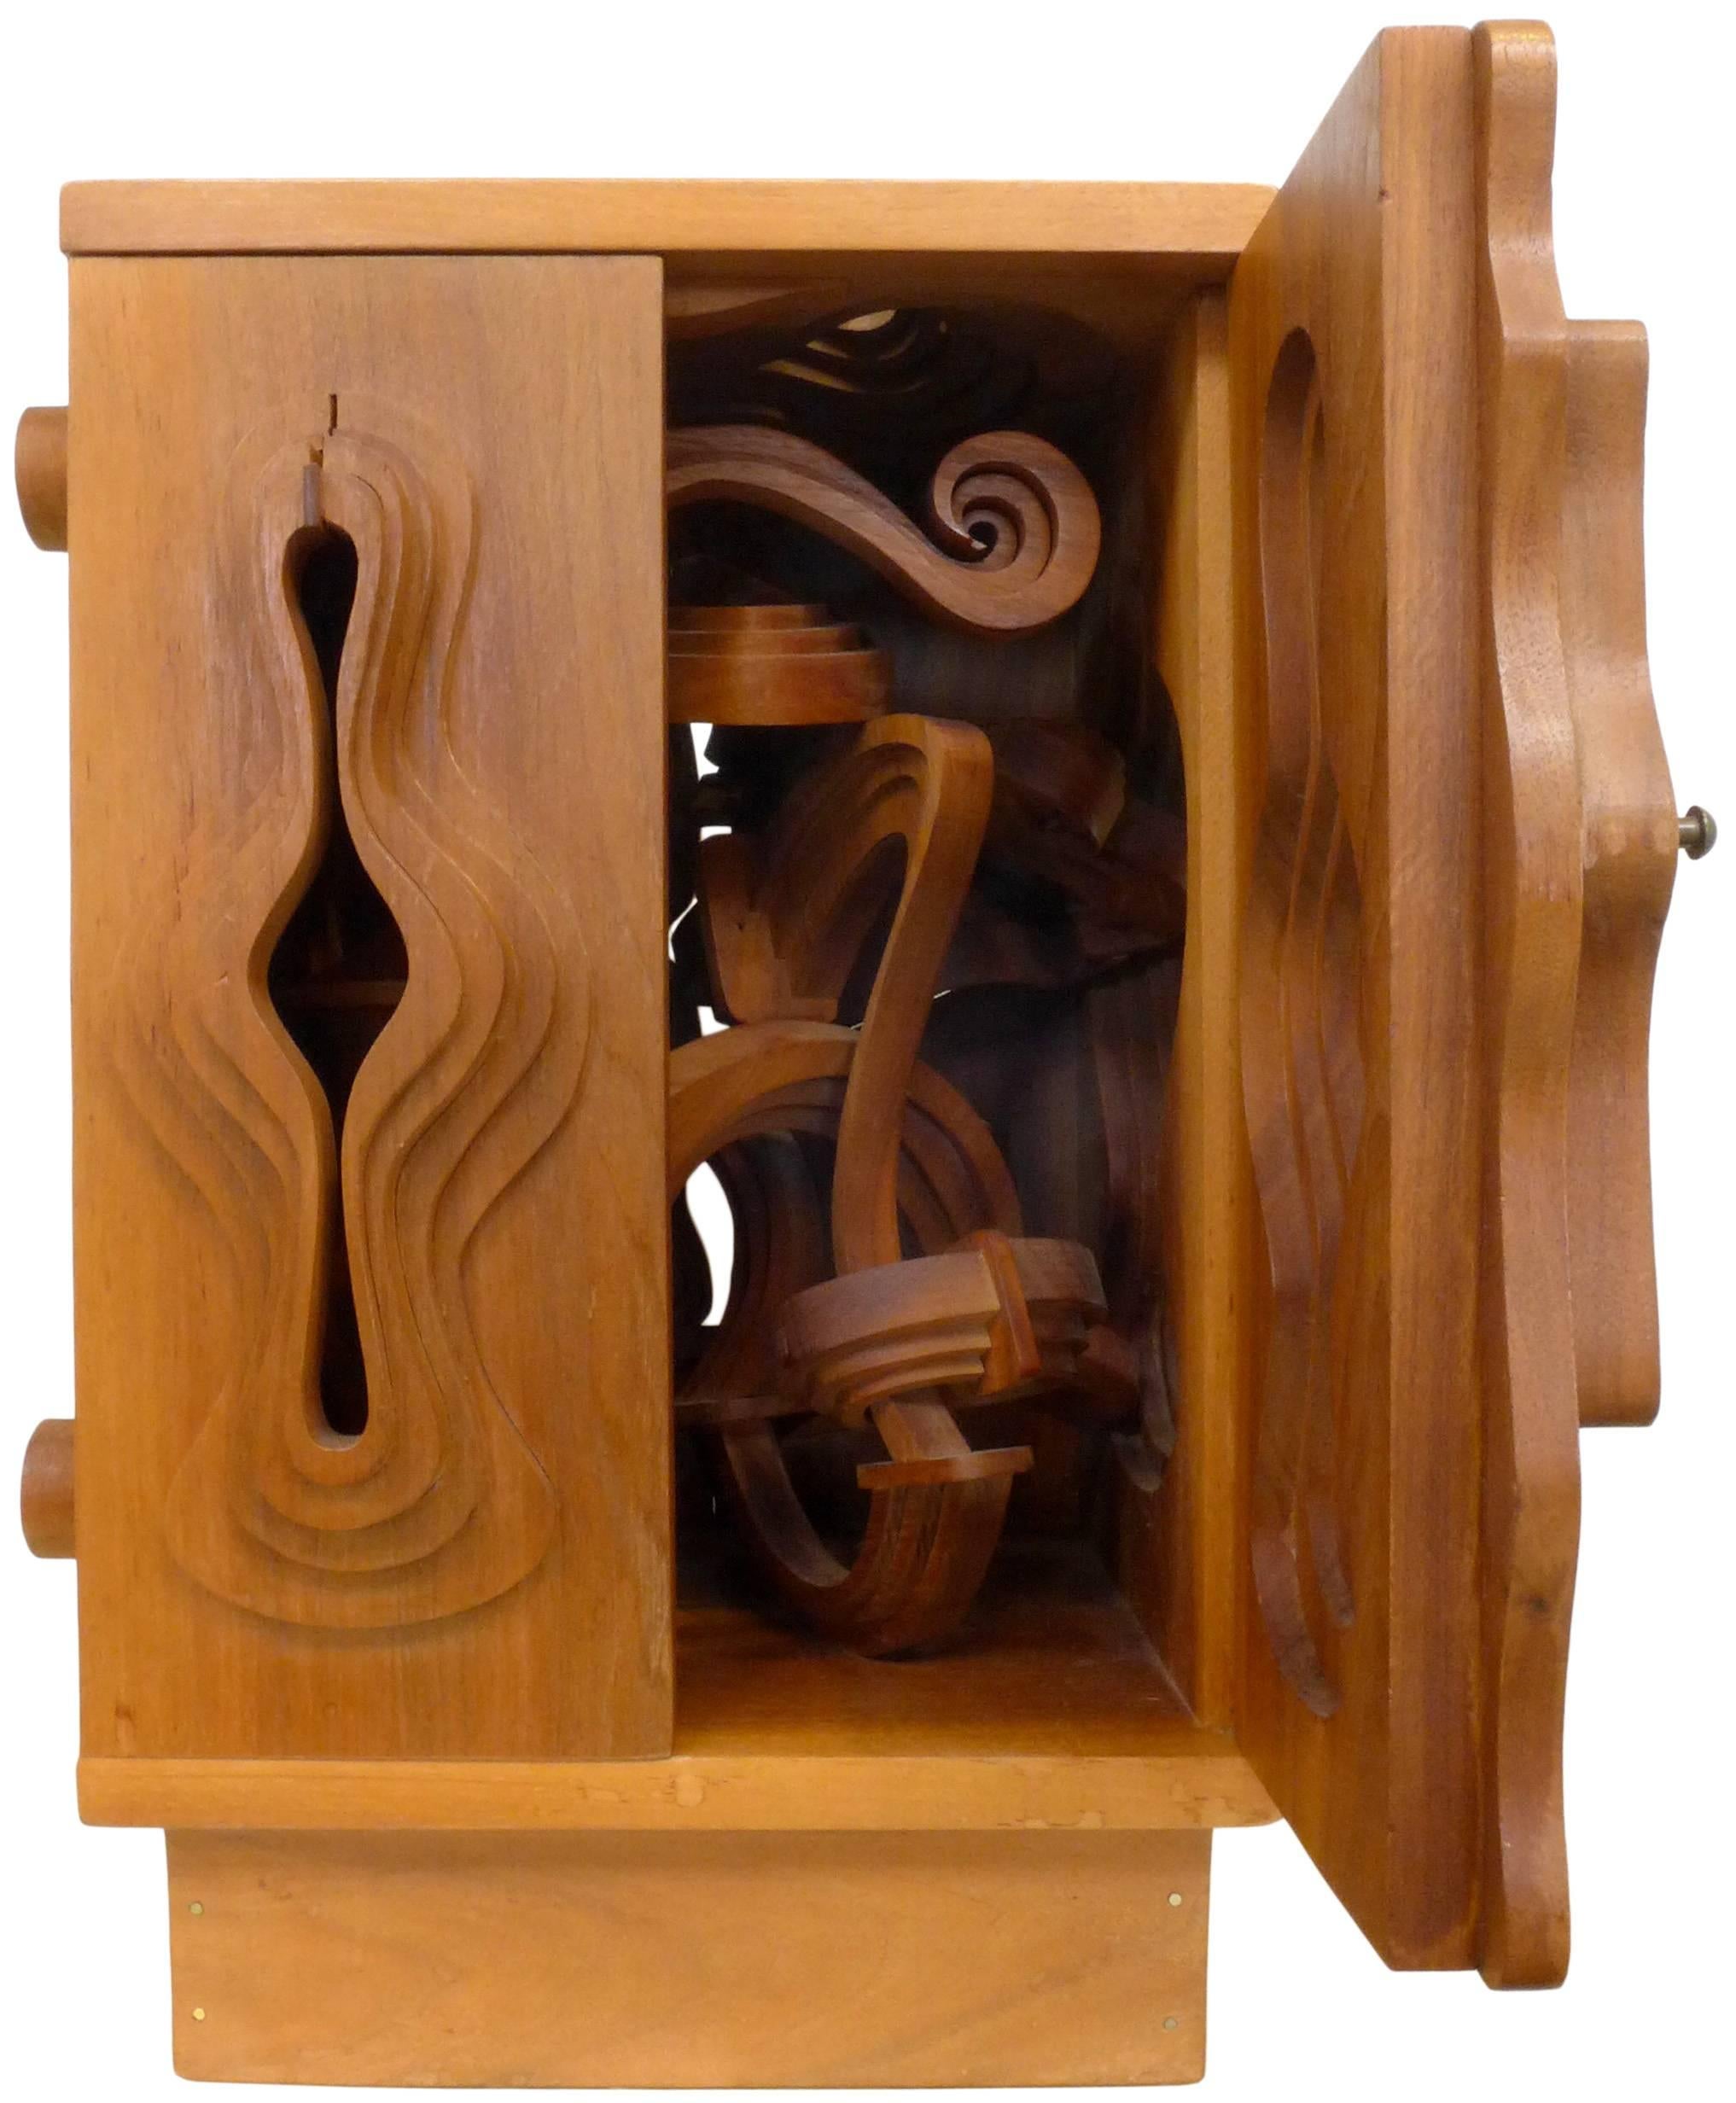 Late 20th Century Wood Sculpture Cabinet by John Risley